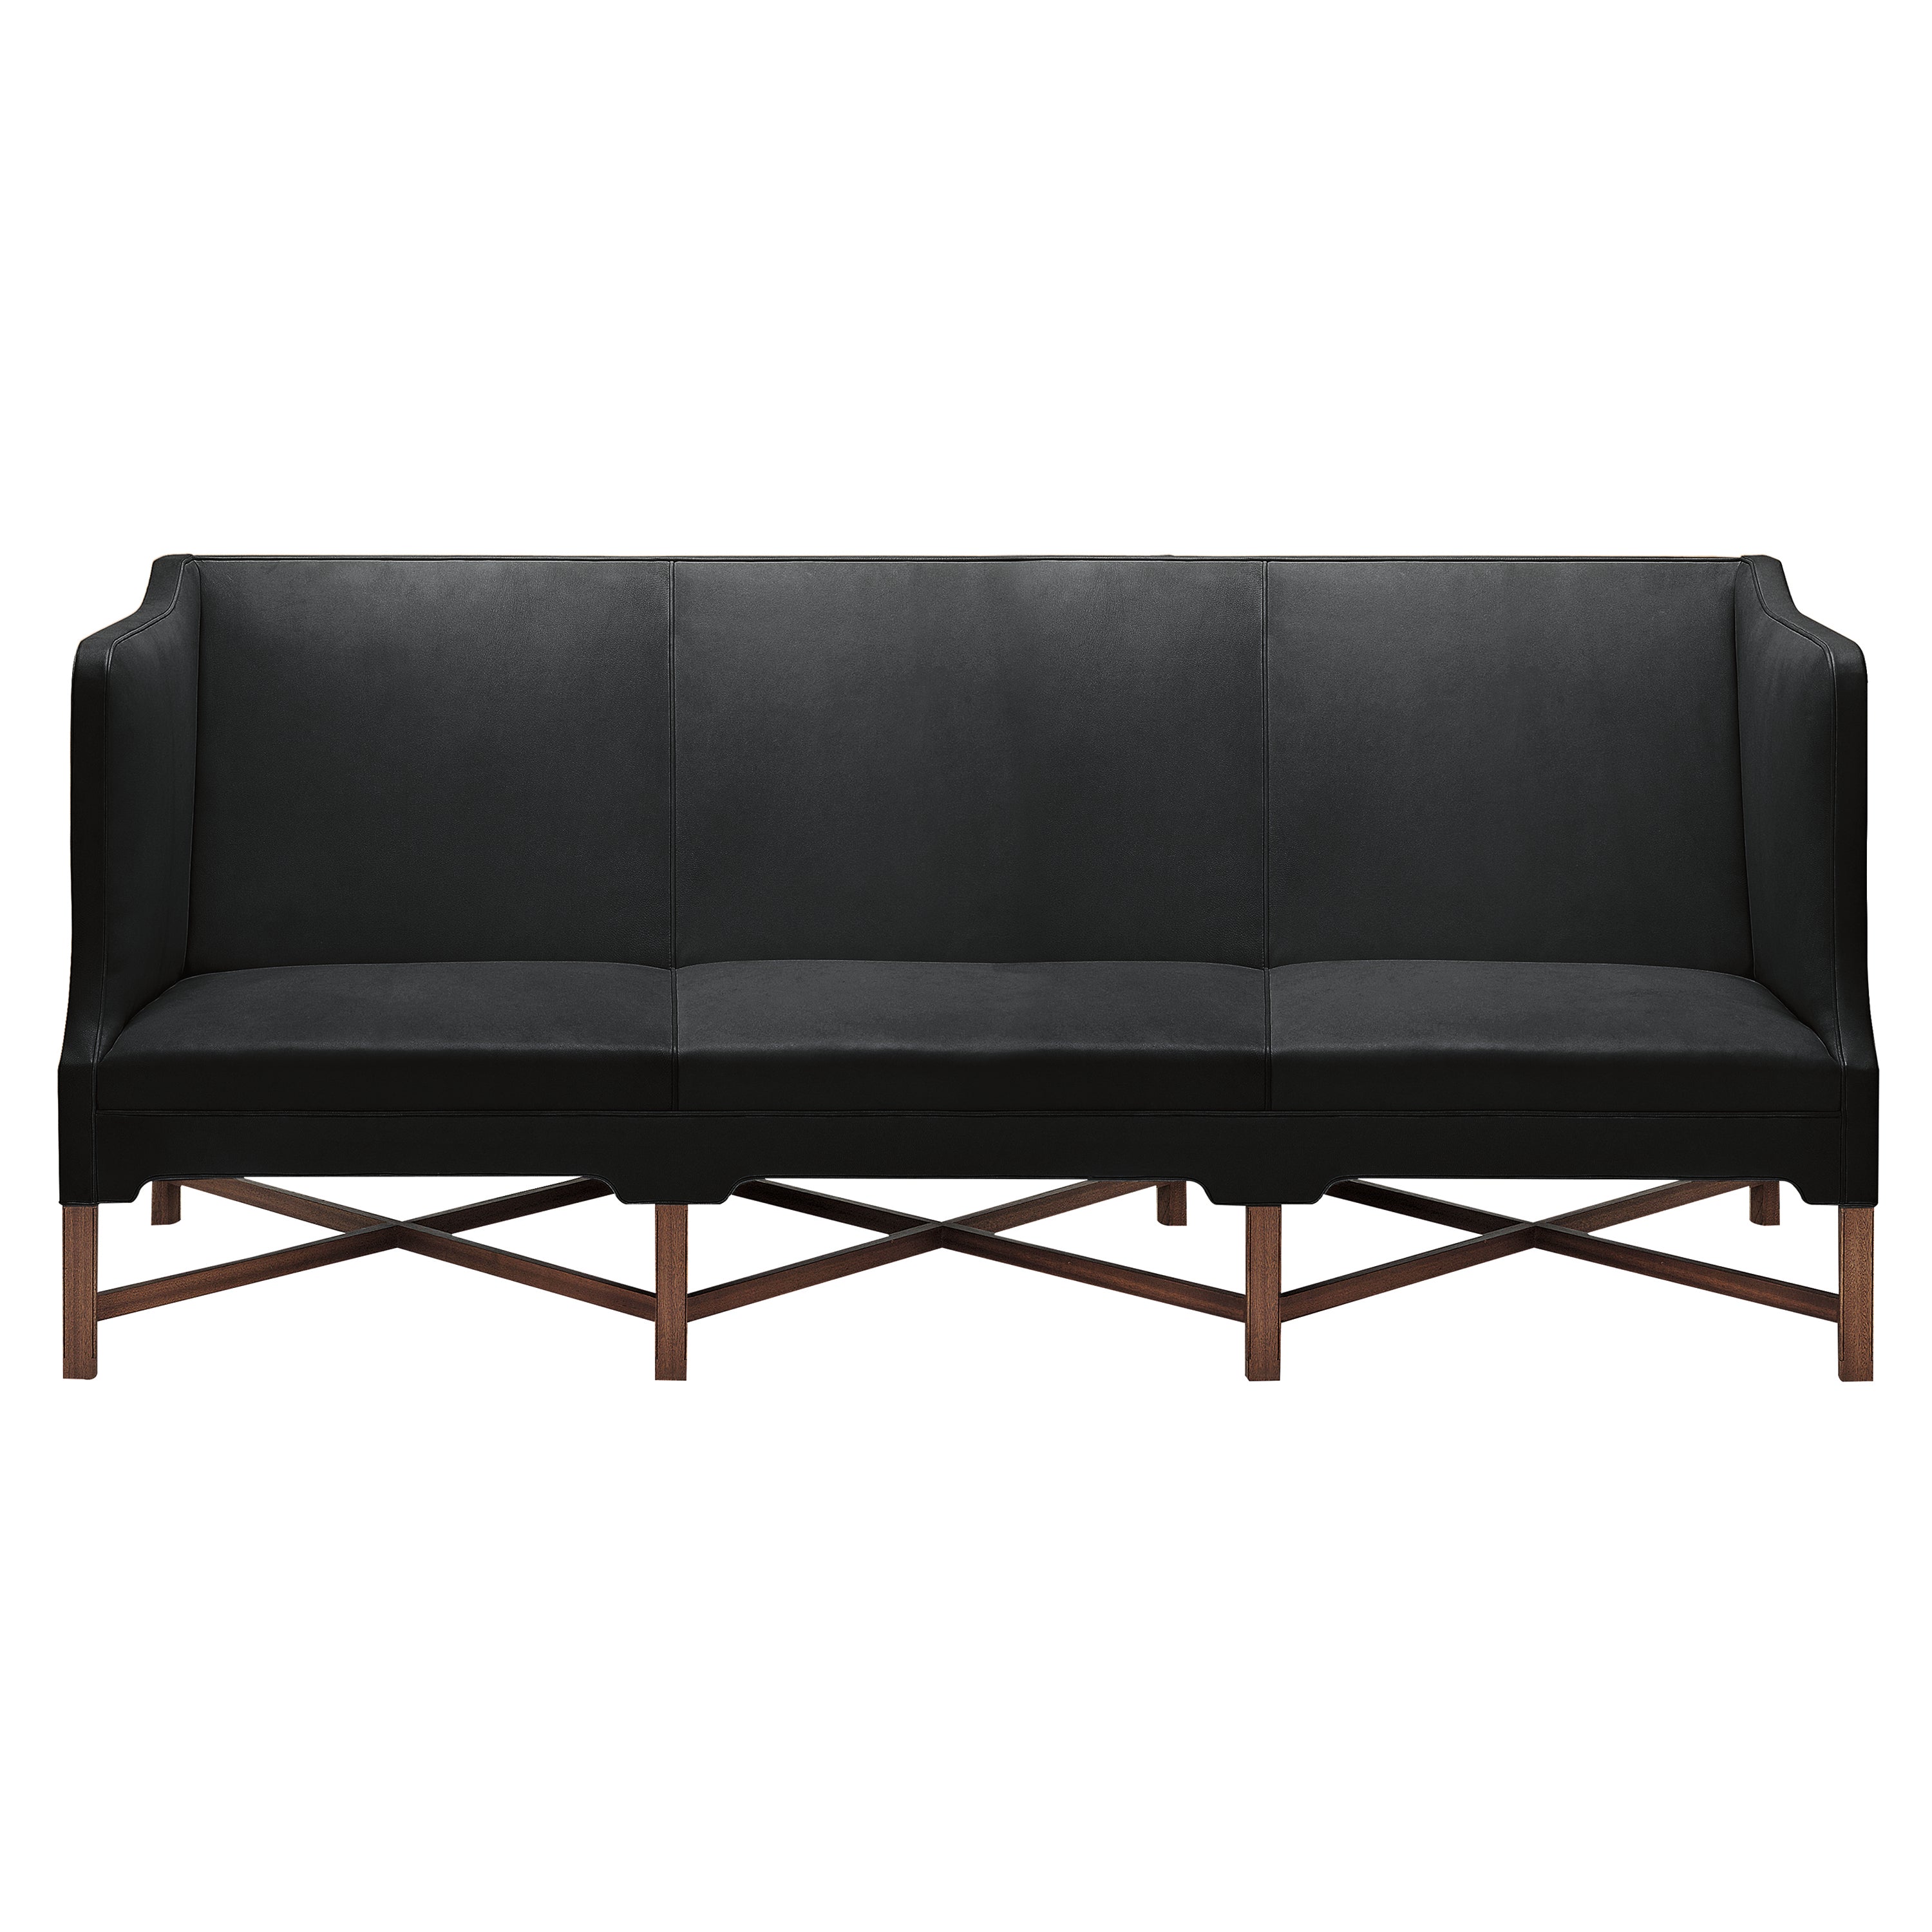 Sofa with High Sides: 3 Seater + Oiled Walnut